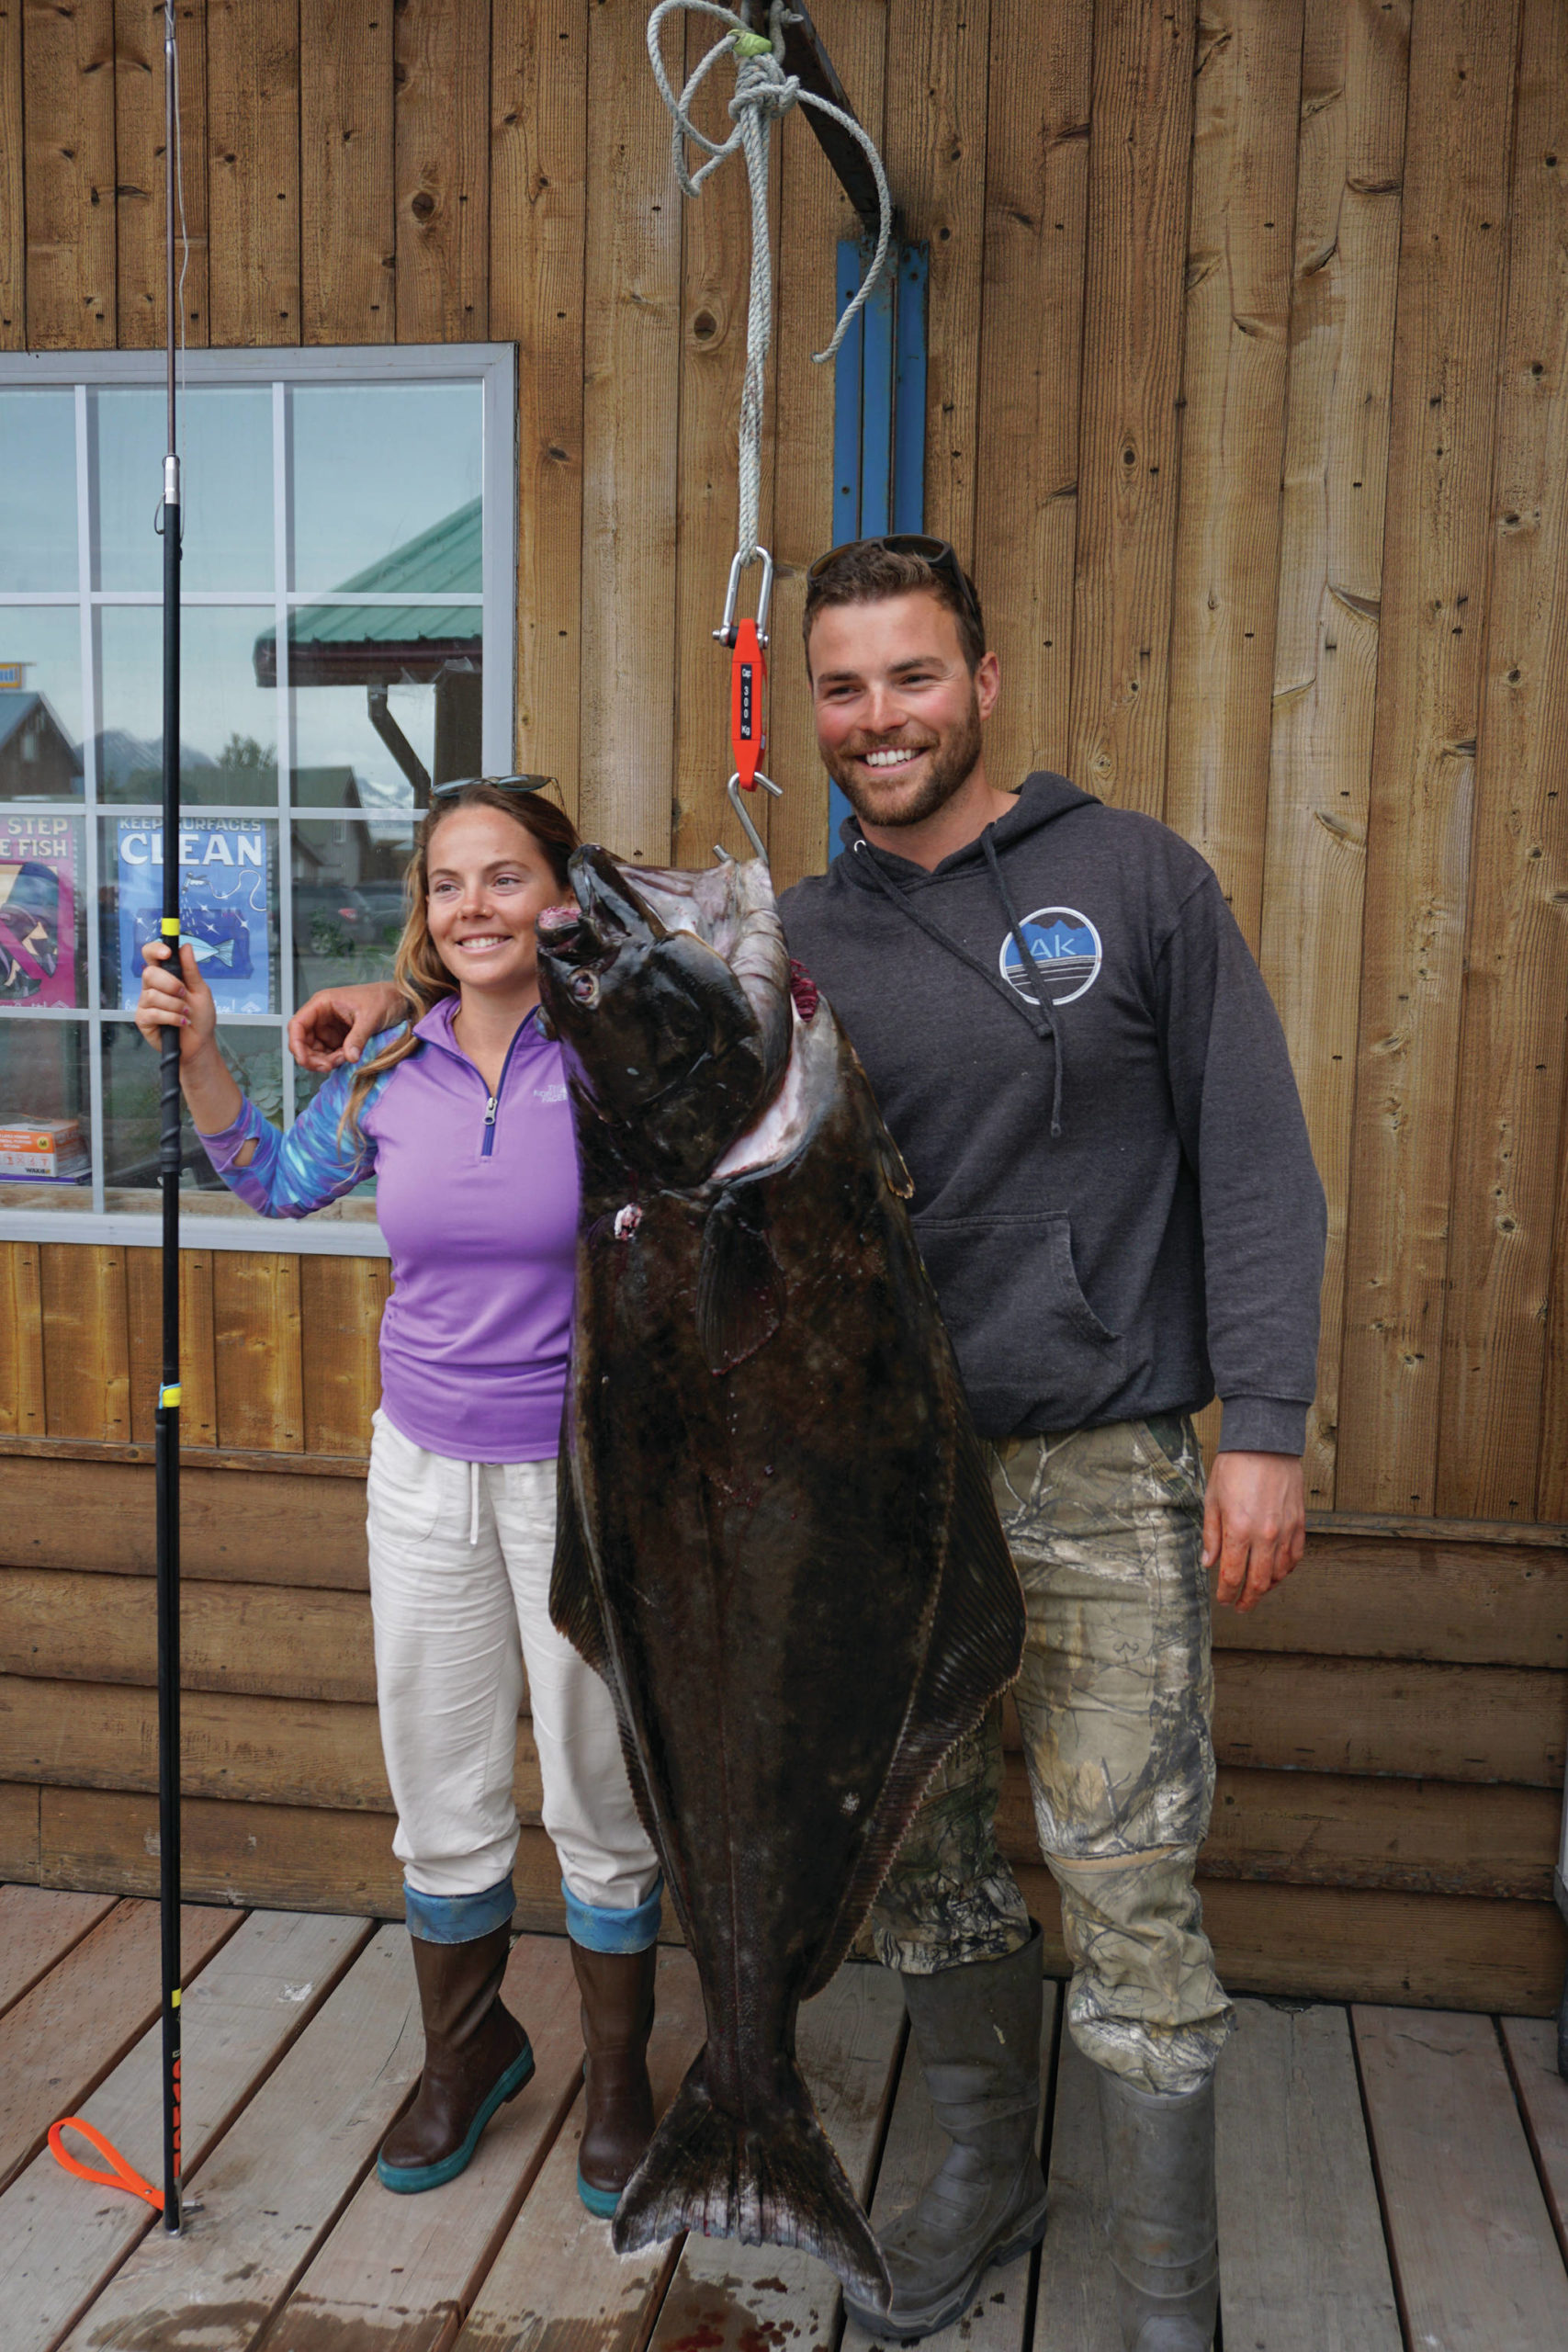 Lisa Stengel of Fort Lauderdale, Florida, poses for a photo with Capt. Brian Reid of the Castle Cape on Monday, July 12, 2021, at Coal Point Seafoods in Homer, Alaska, with a 71.4-pound halibut that she caught with a pole spear while free diving in Kachemak Bay. Stengel and her party went on a spearfishing expedition with Reid of Coldwater AK. (Photo by Michael Armstrong/Homer News)